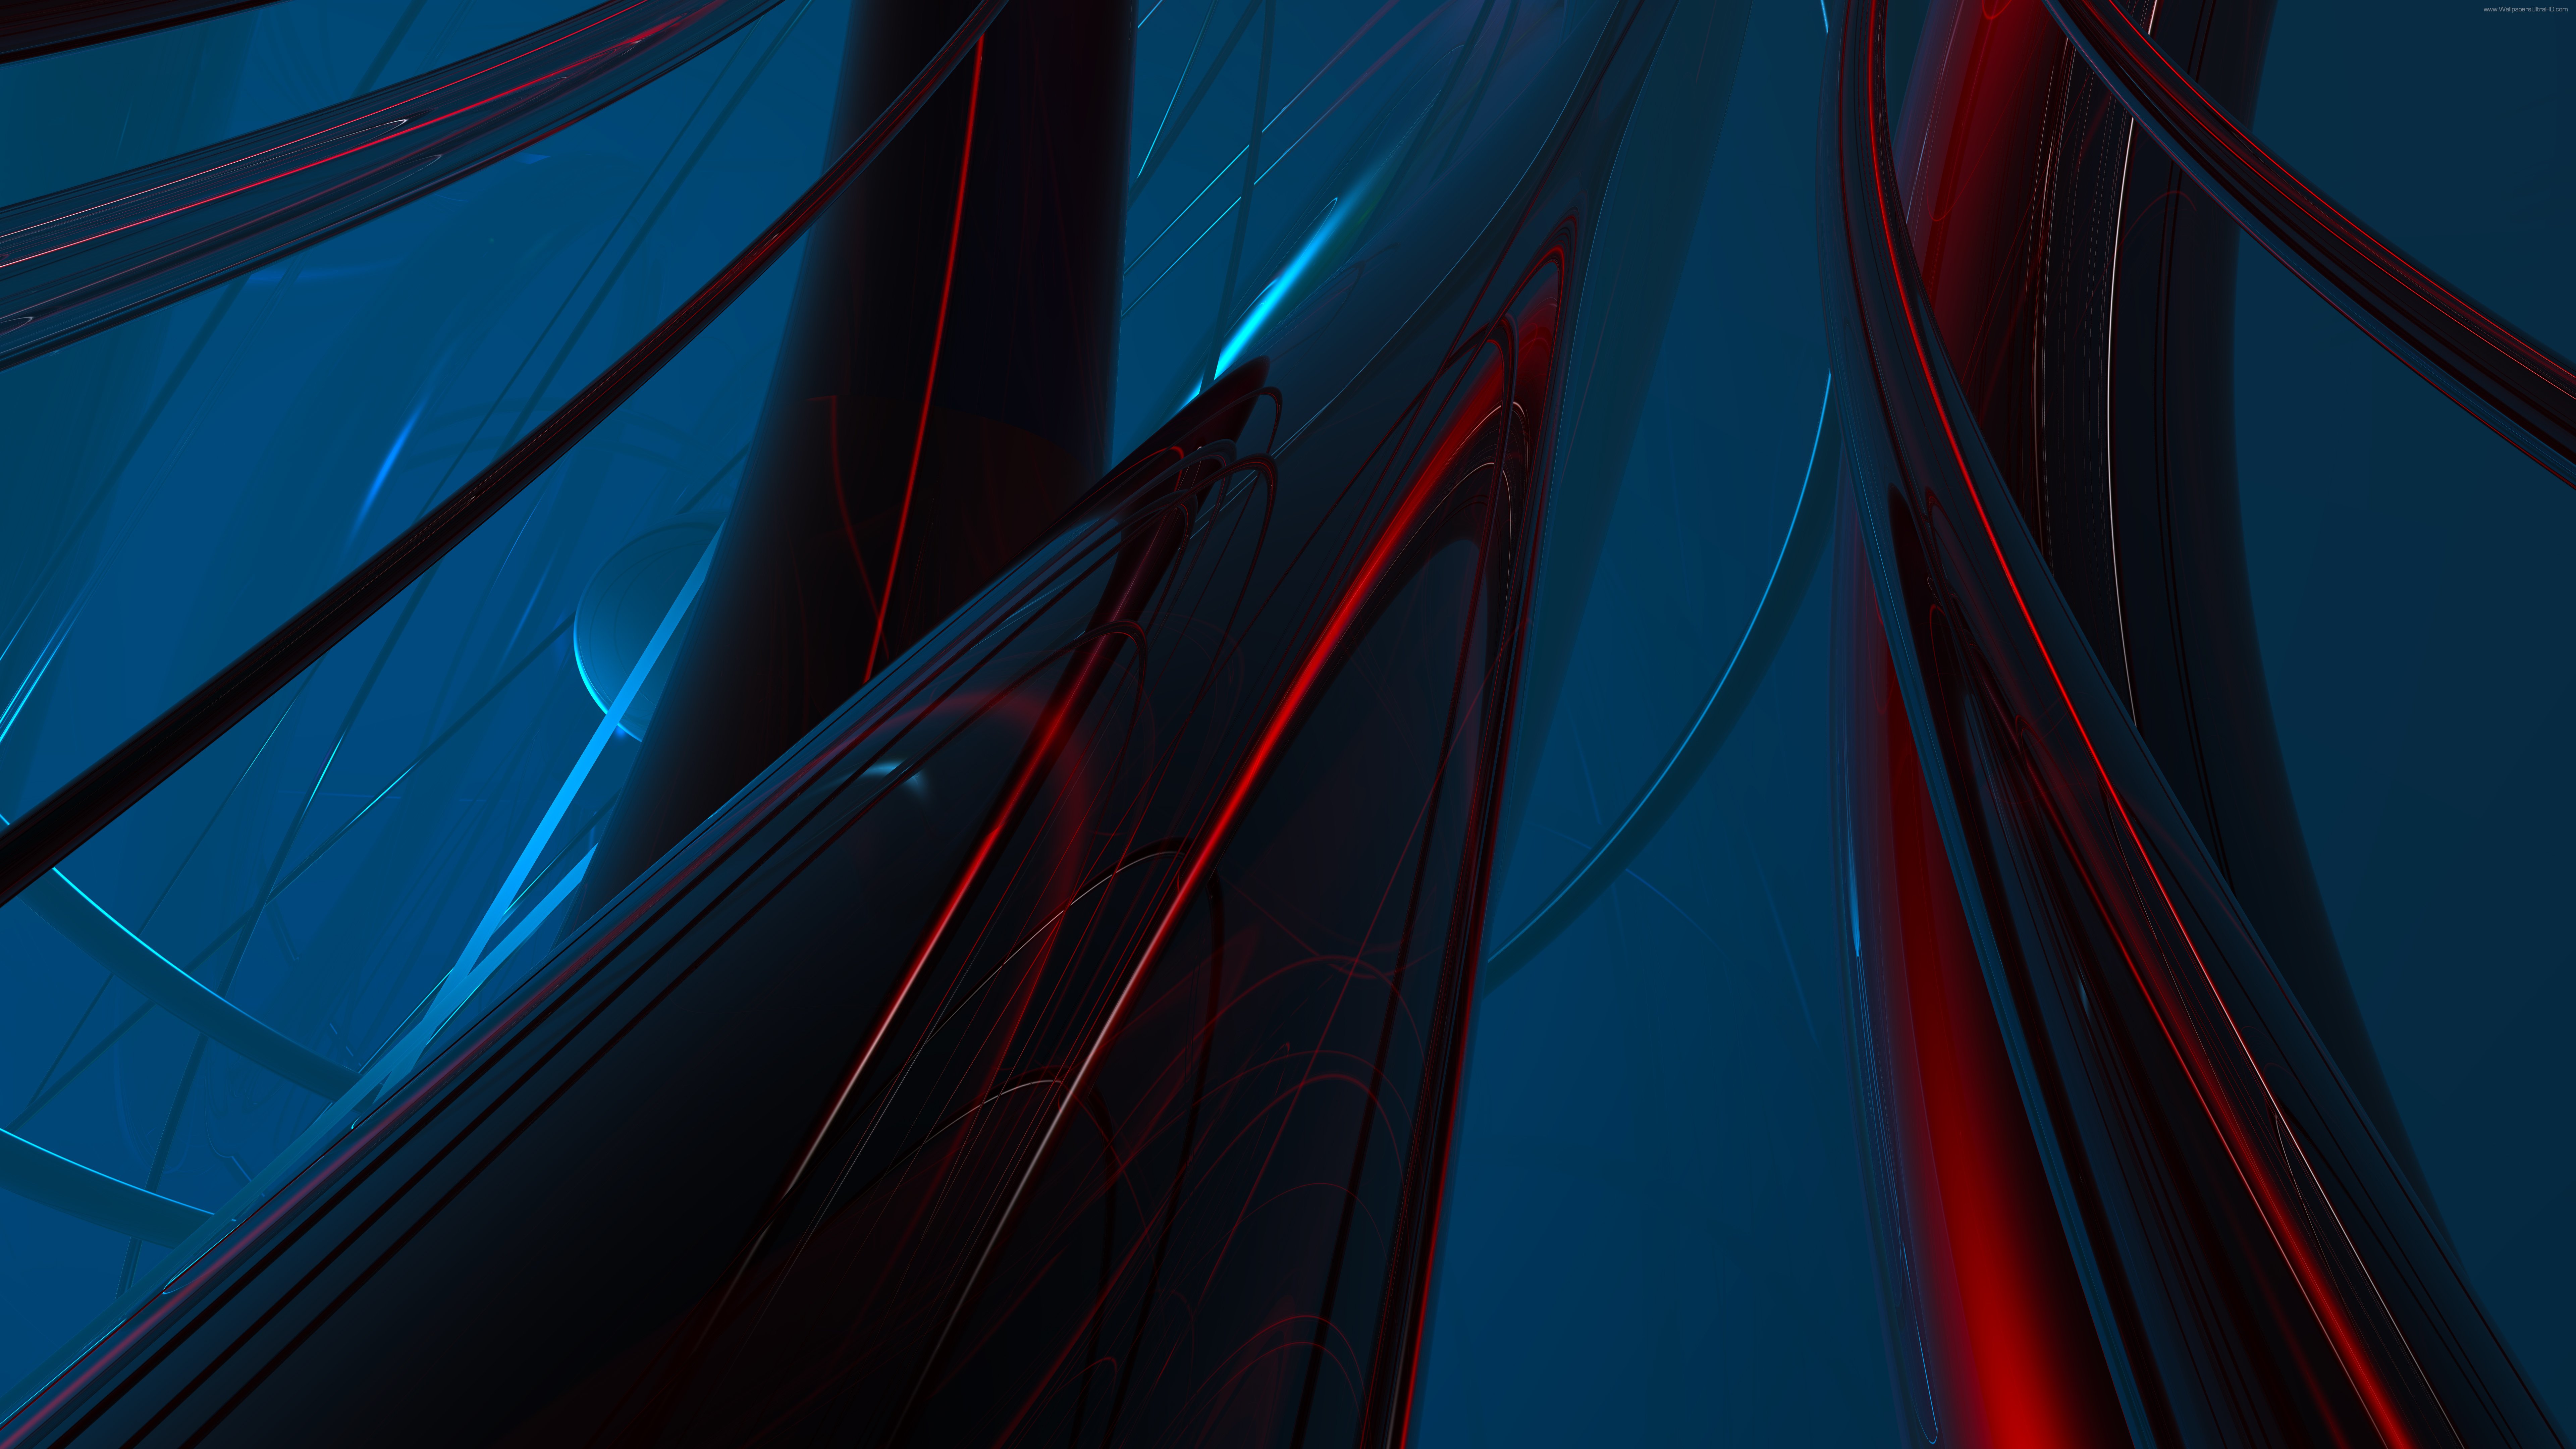 Blue and Red Light Streaks. Wallpaper in 7680x4320 Resolution